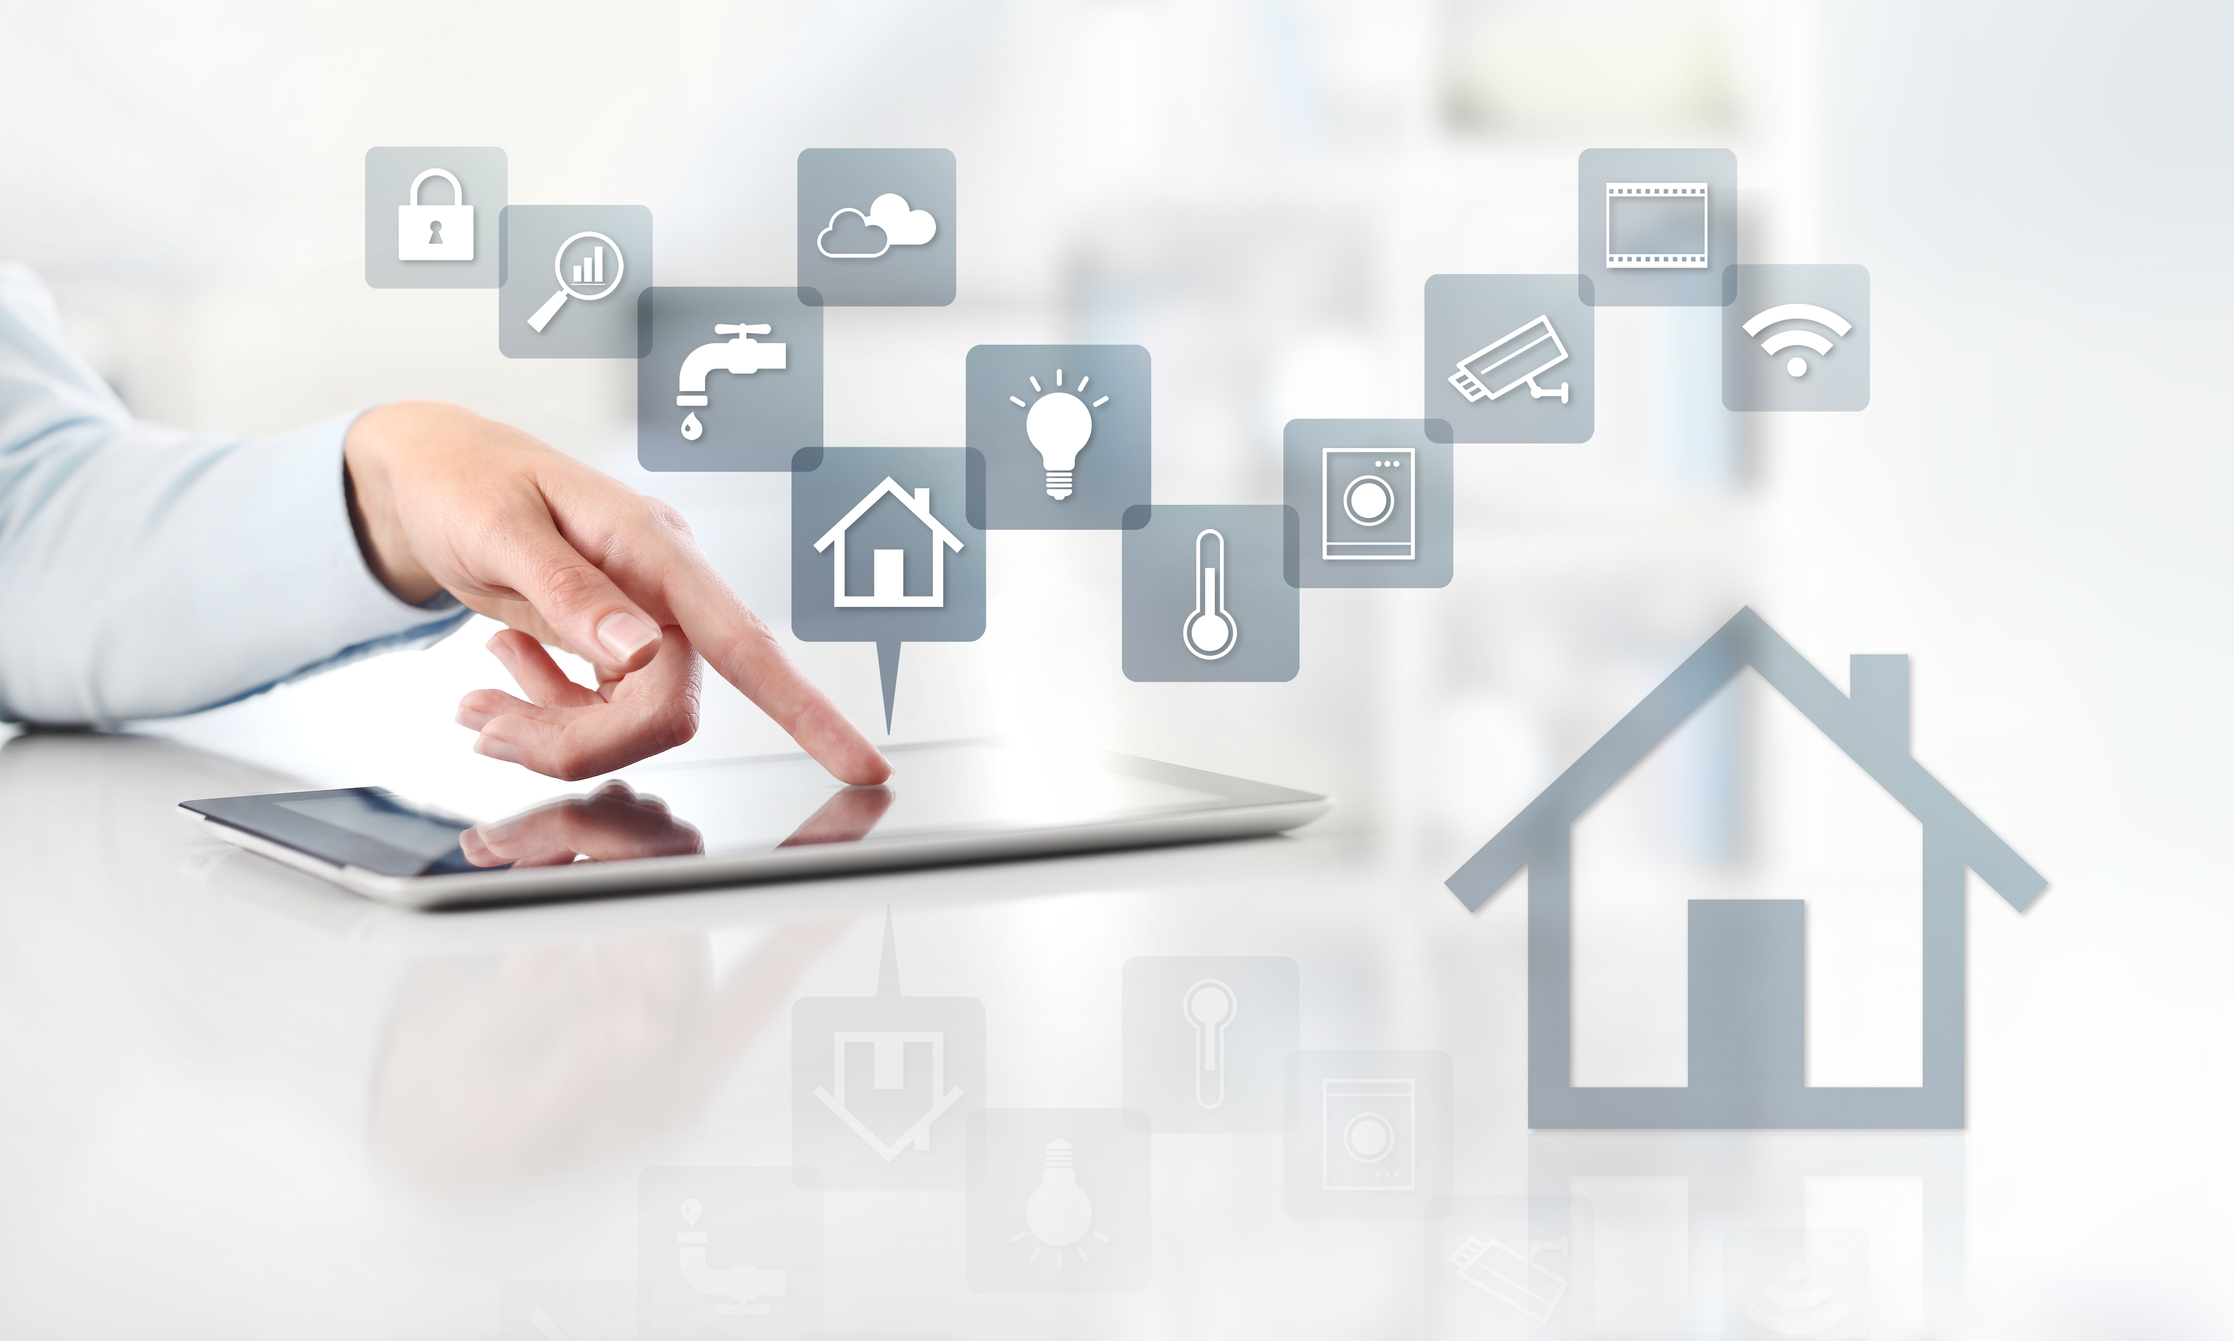 What is a smart home and what are the benefits?